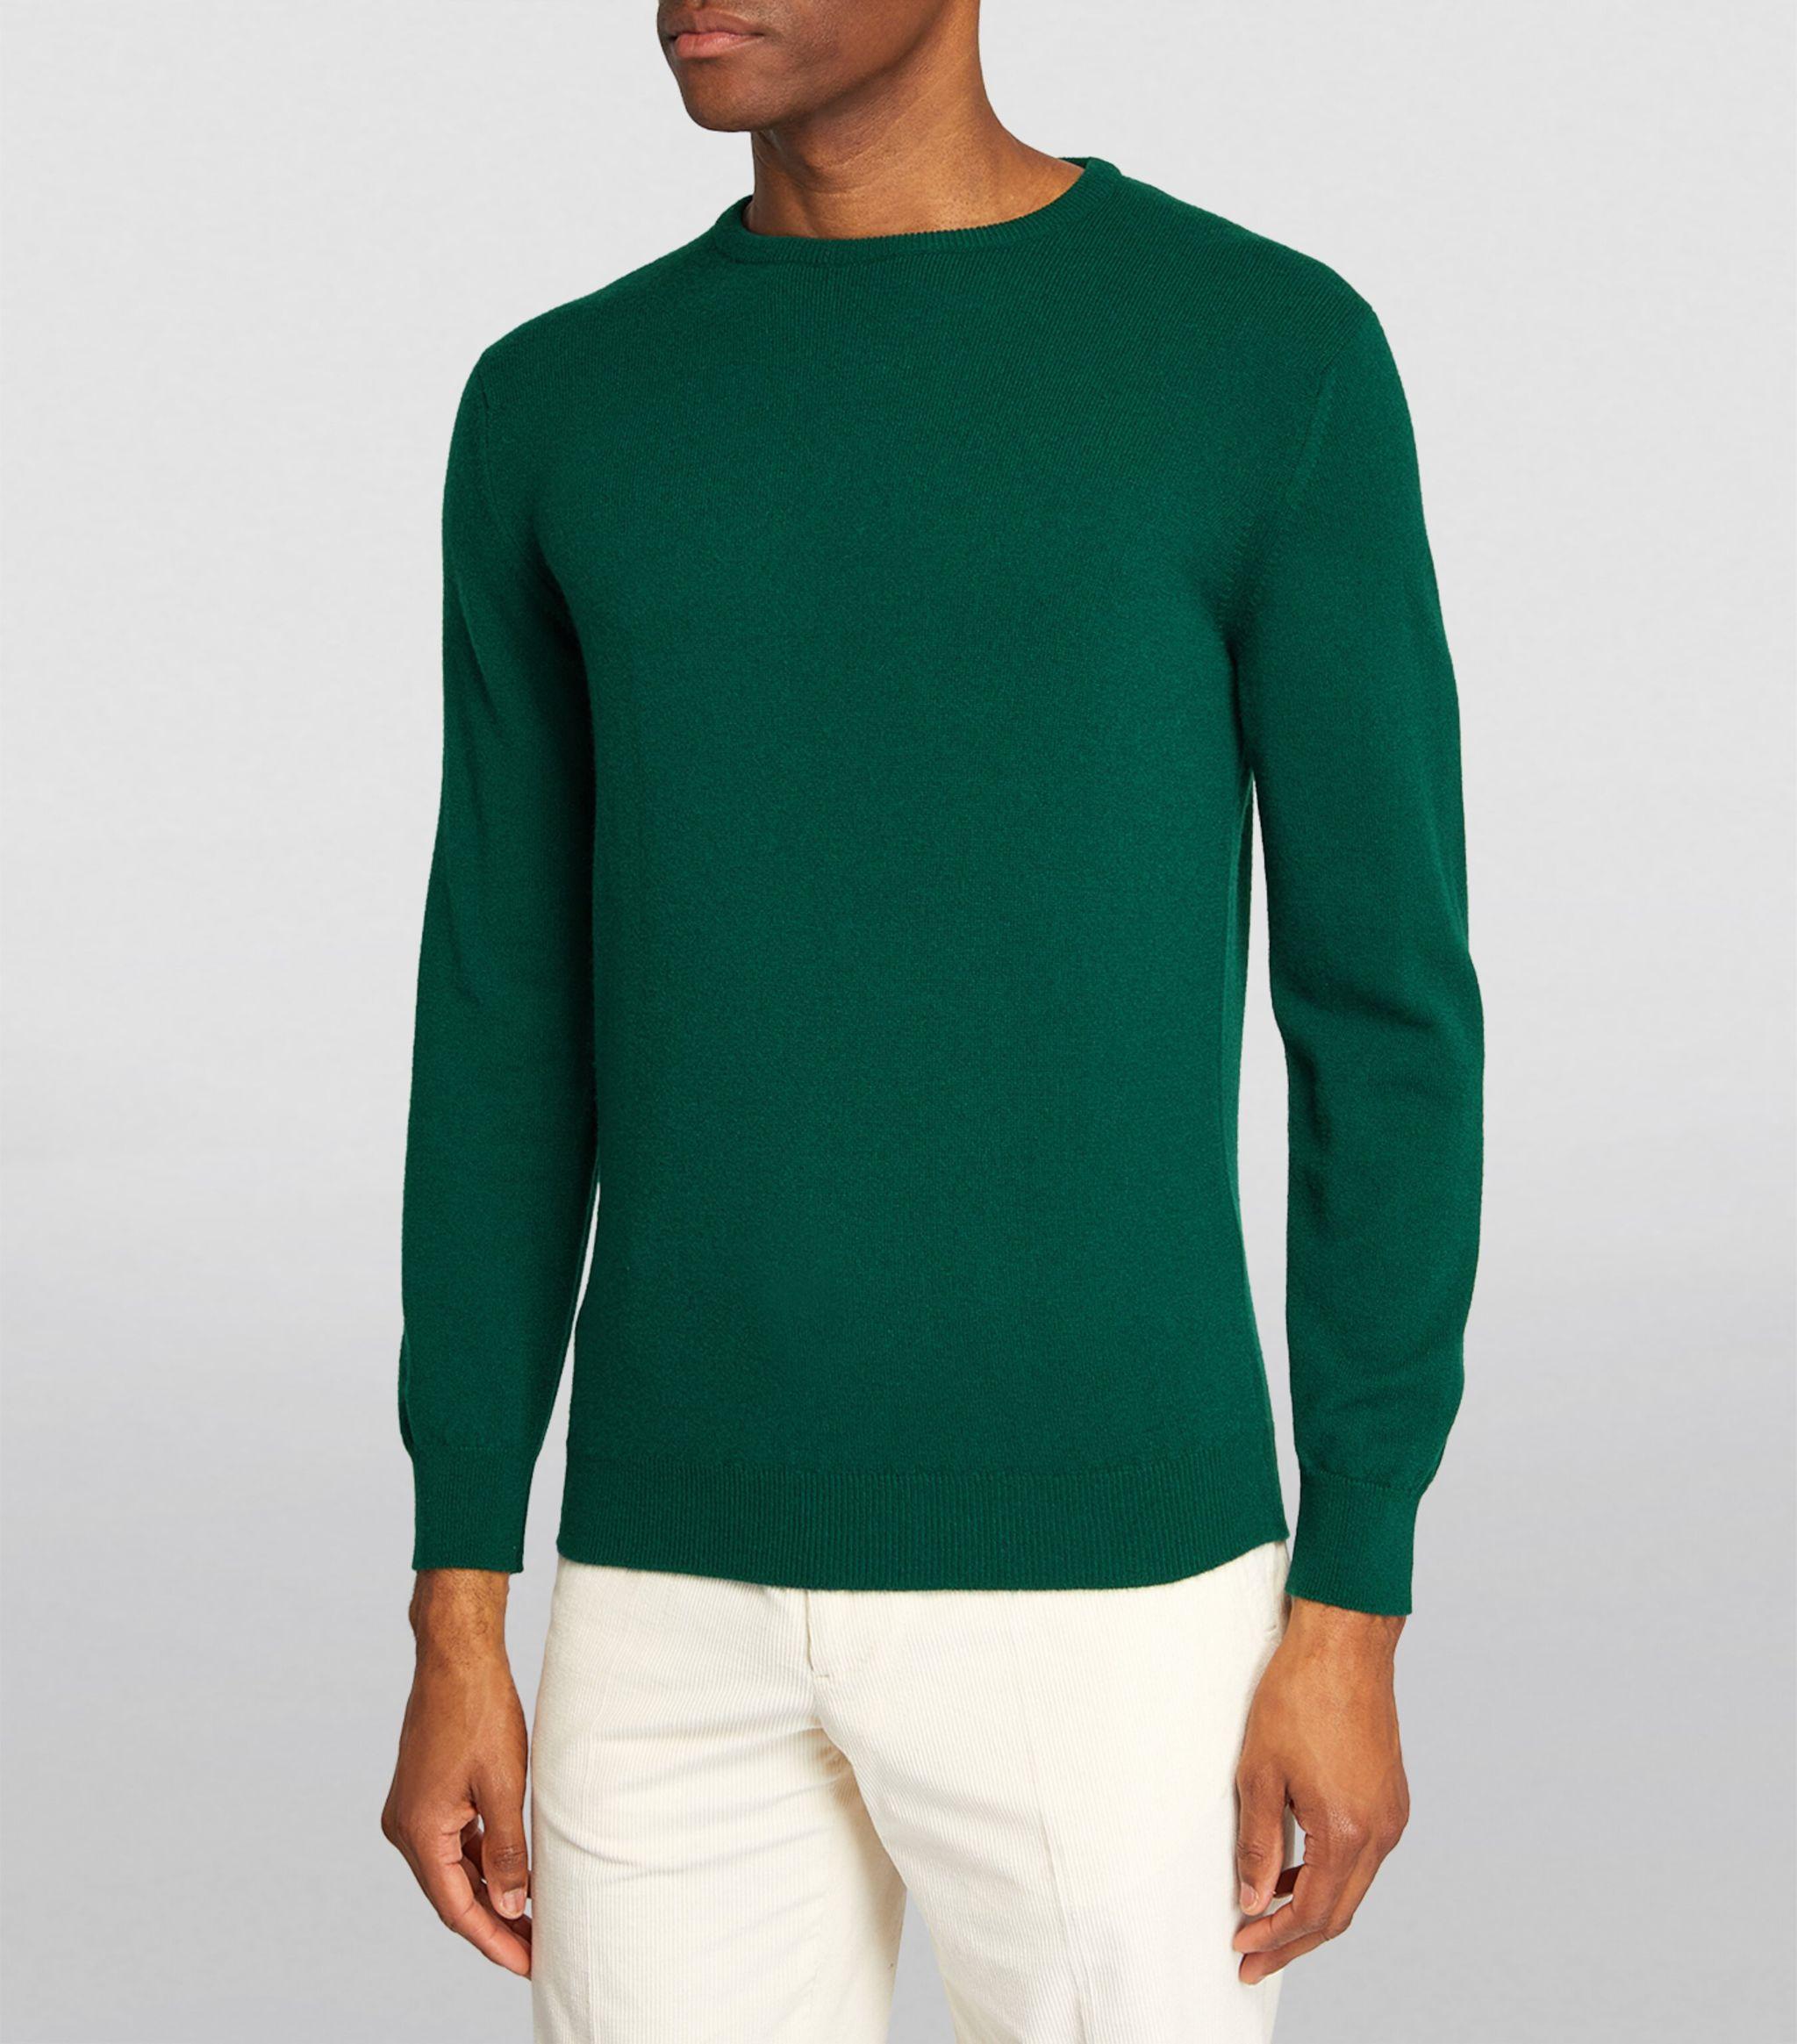 Harrods Cashmere Crew-neck Sweater in Green for Men | Lyst